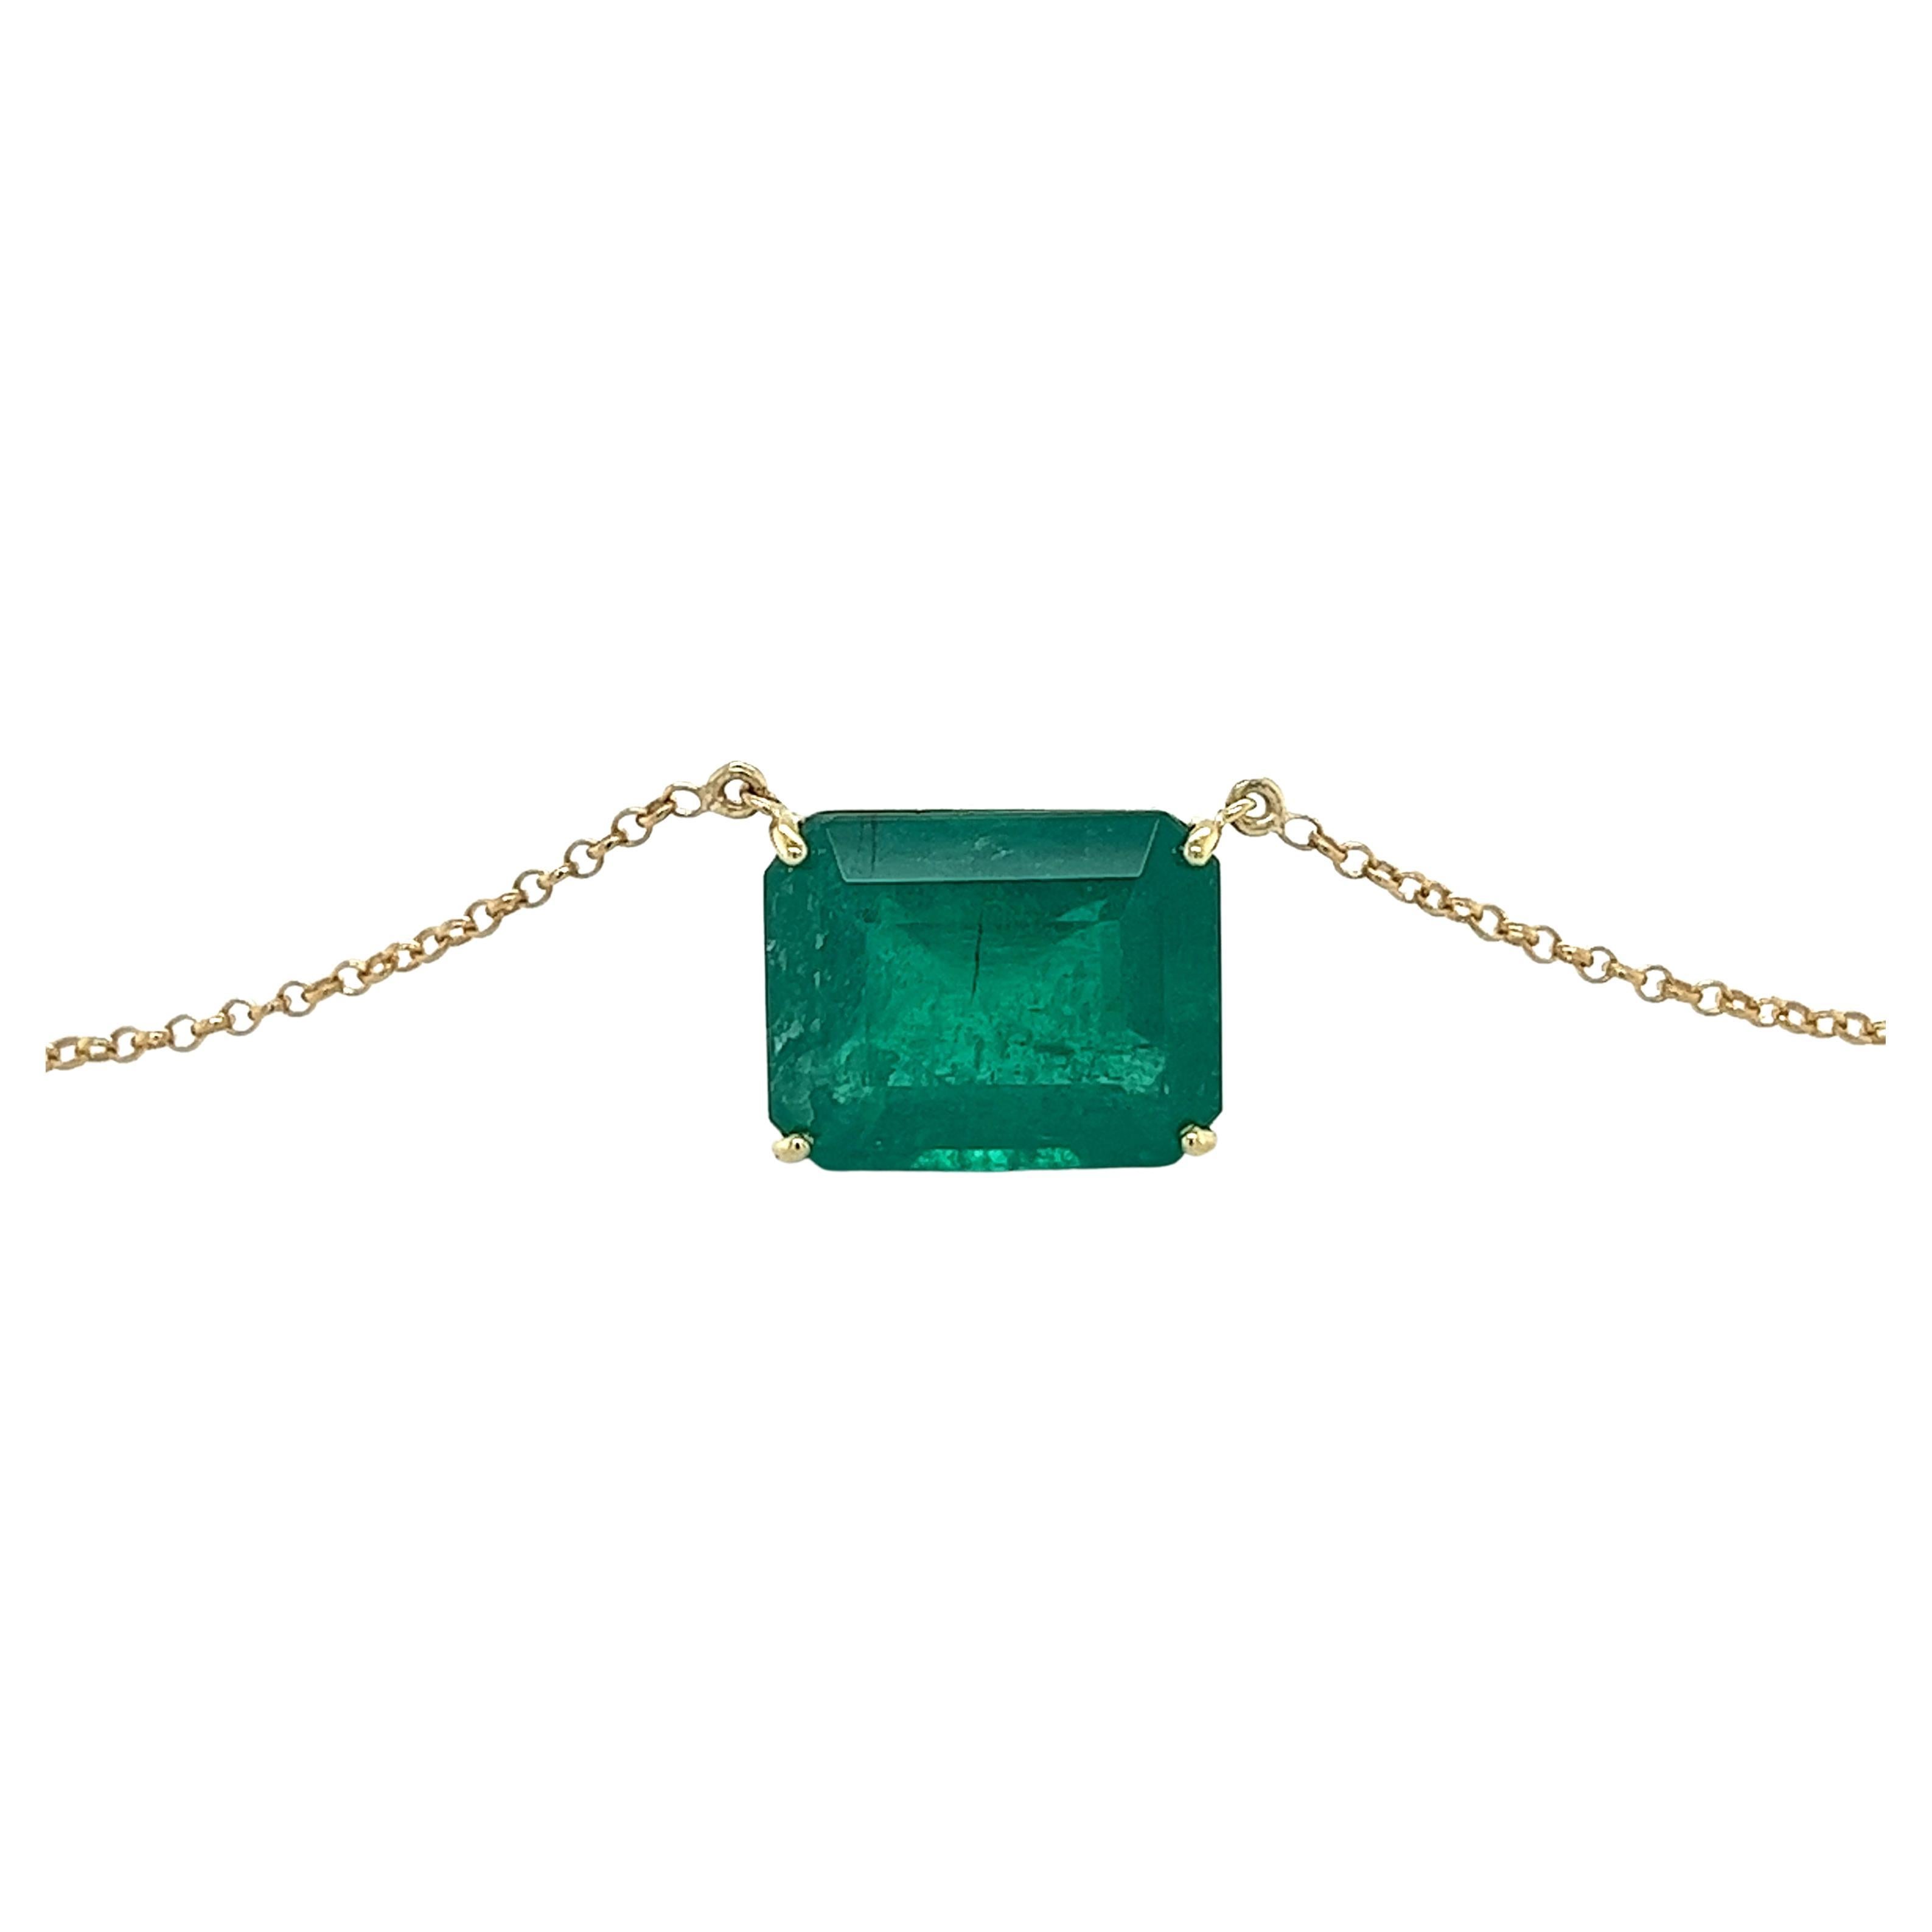 8.67 Carat Vivid Green Colombian Emerald Solitaire Pendant Necklace in 18K Gold